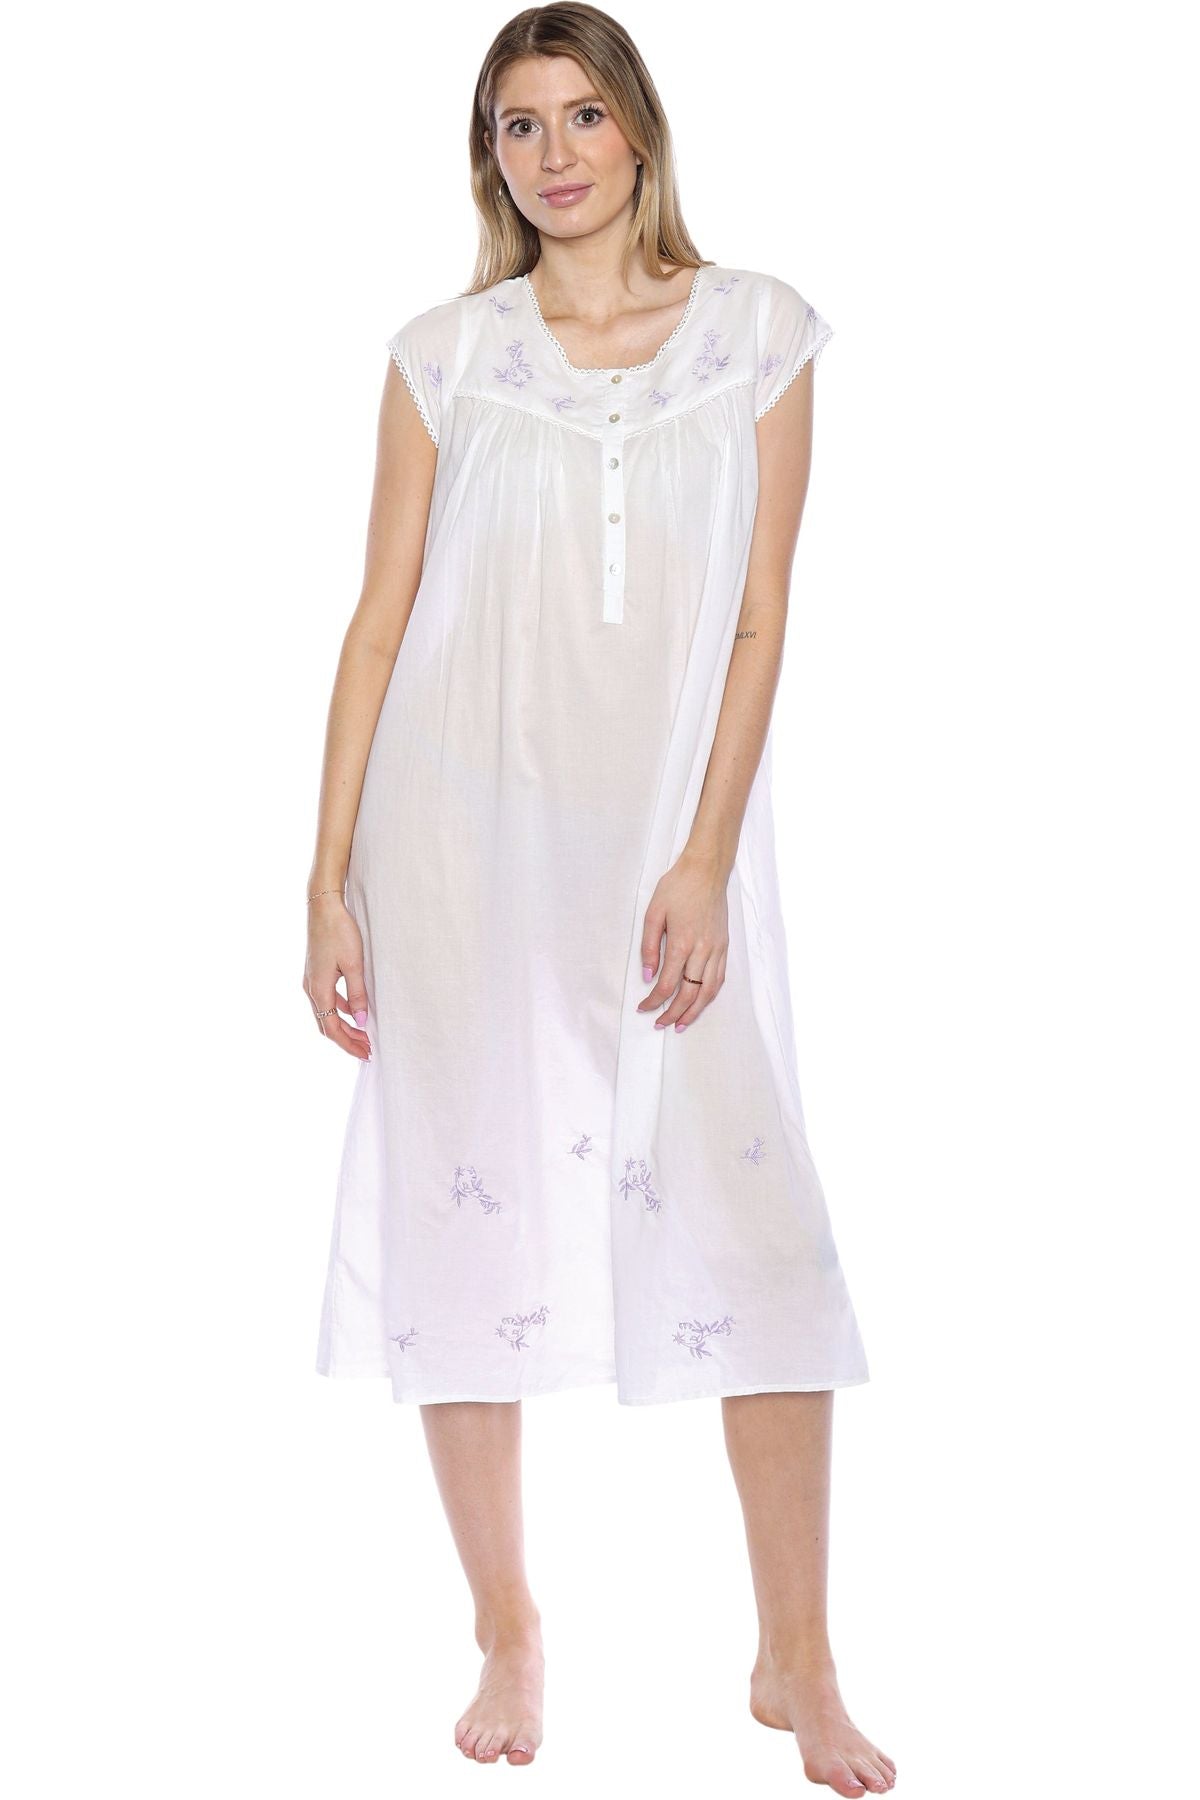 Papa 100% Cotton Long Nightgown - Style PJ4474 – Close To You Boutique